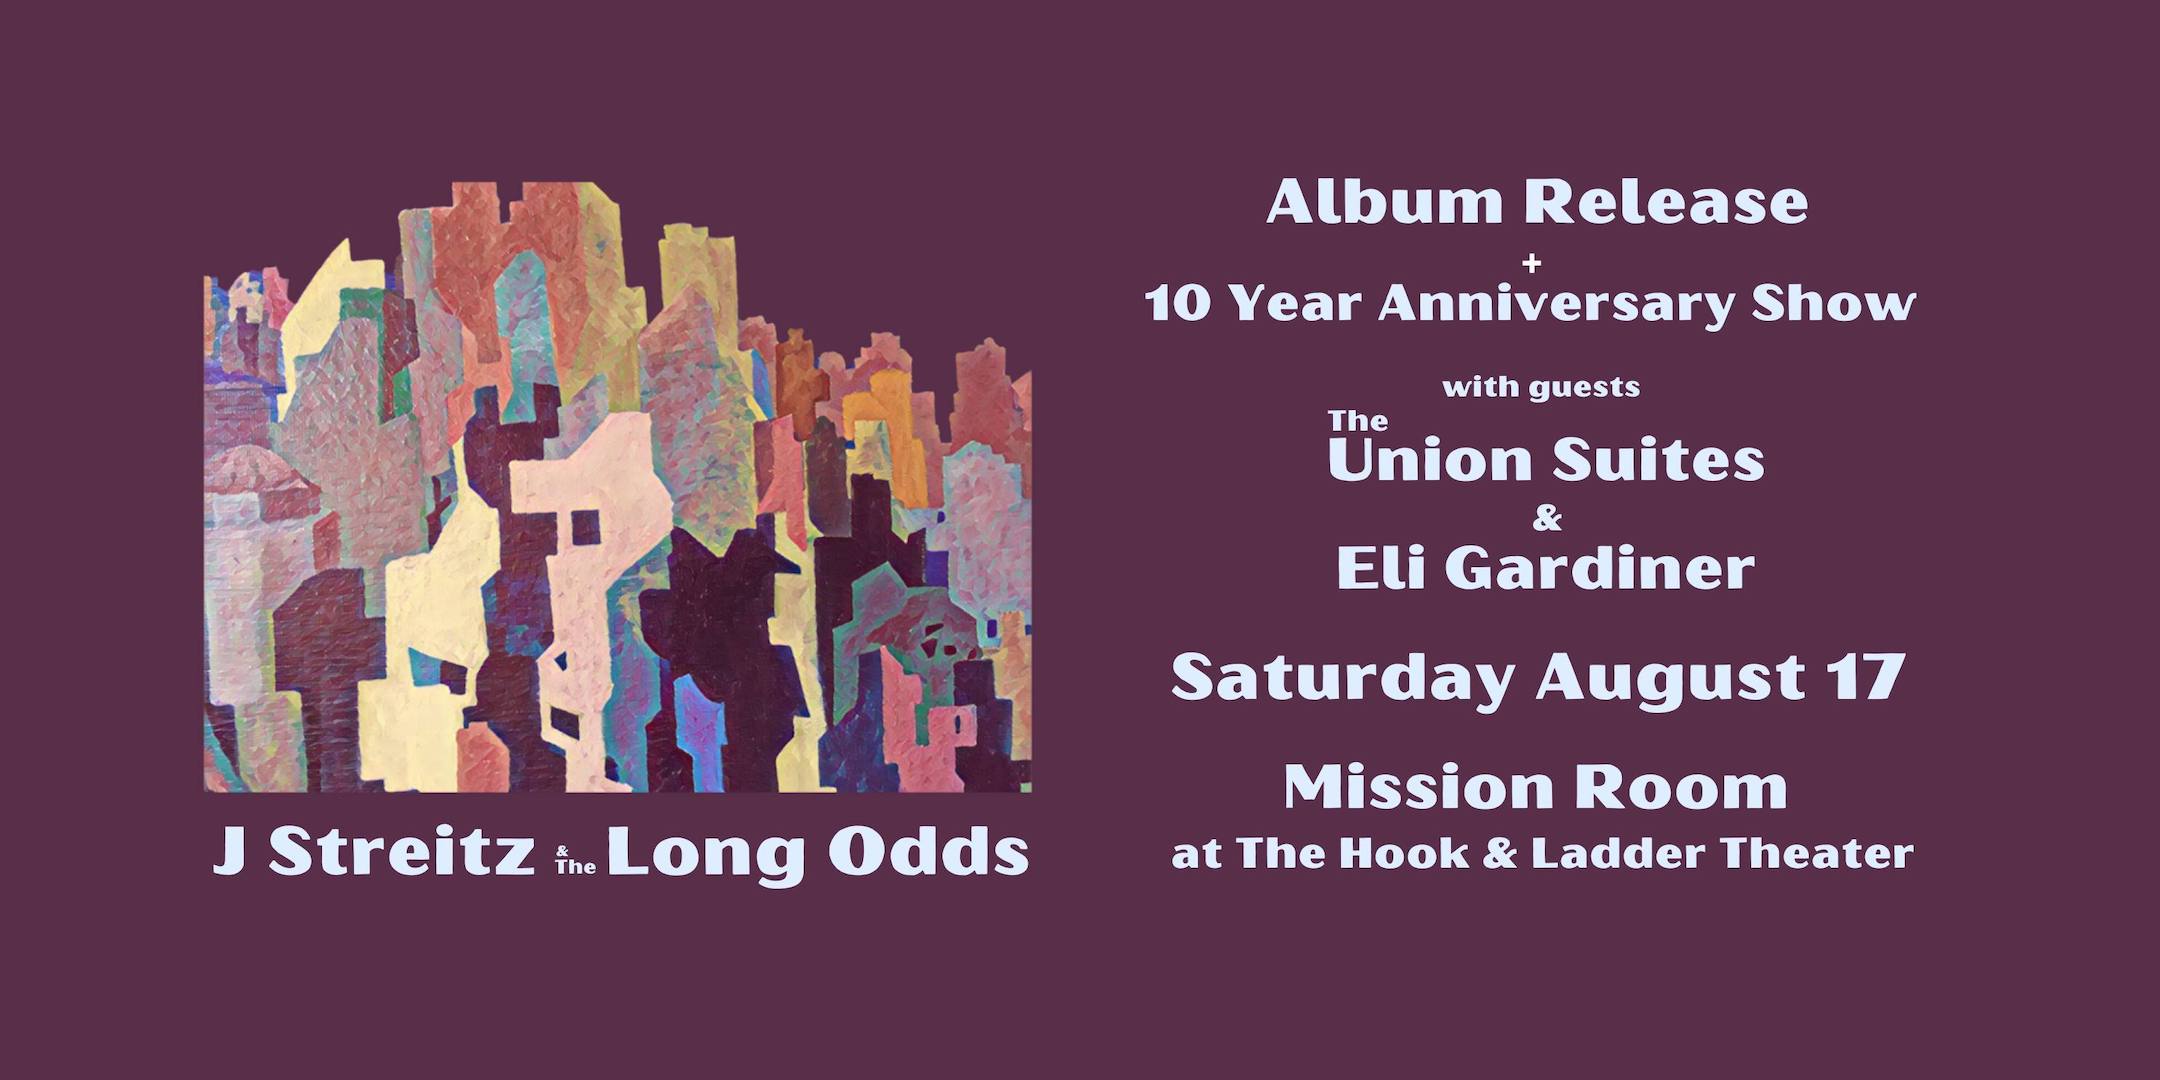 Album Release & 10 Year Anniversary Show J Streitz and the Long Odds with The Union Suites & Eli Gardiner Saturday, August 17 Mission Room at The Hook Doors 6:30pm :: Music 7:00pm GA: $15 ADV / $20 DOS